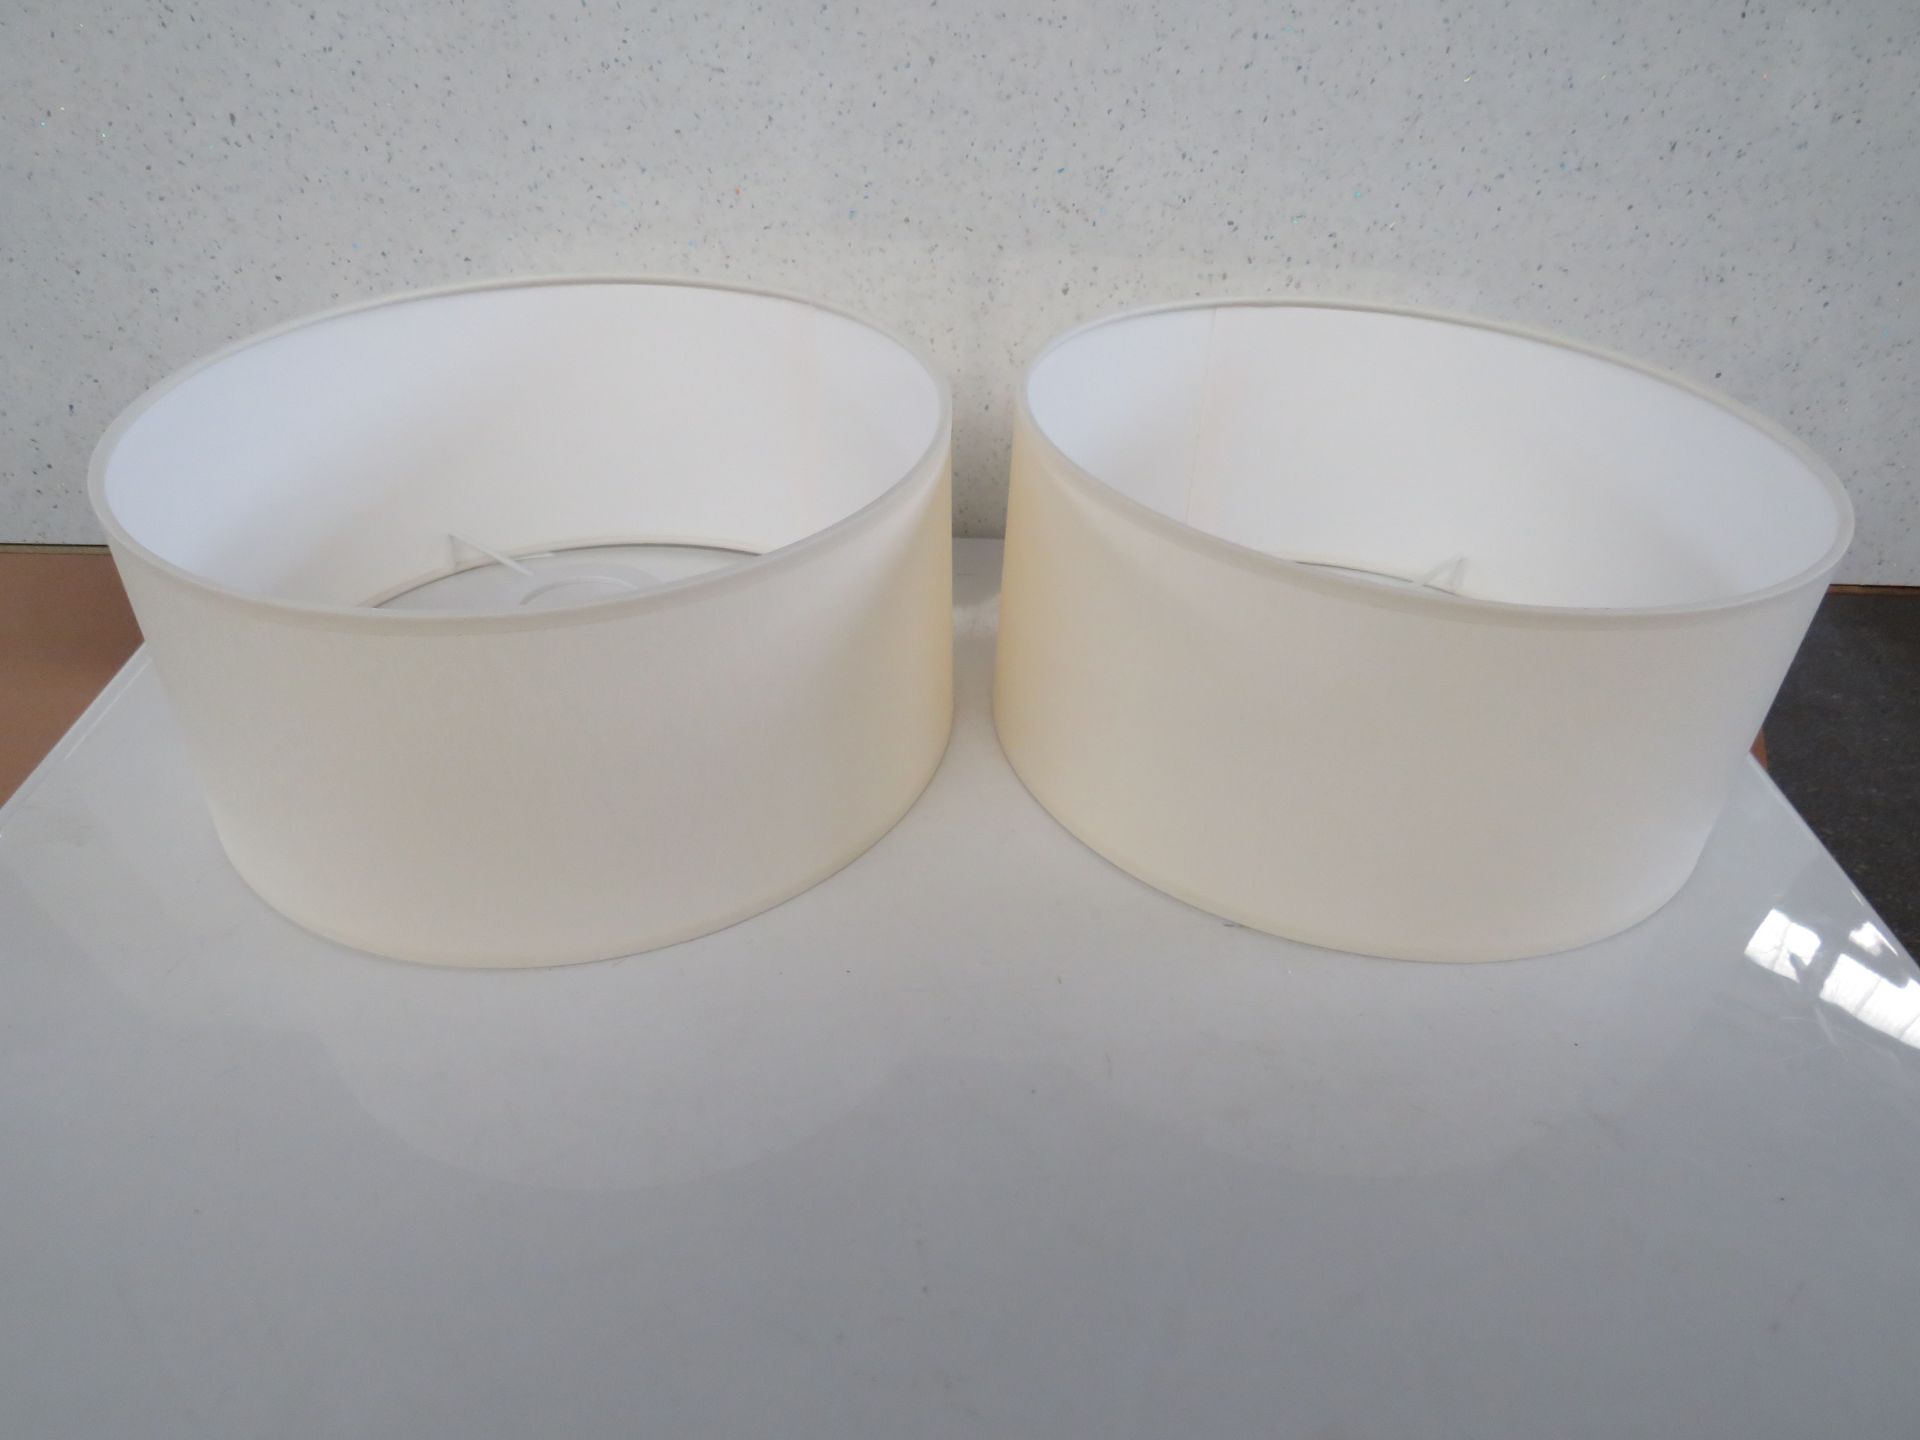 2x Chelsom - Oyster 30cm Light Shades - New & Packaged.